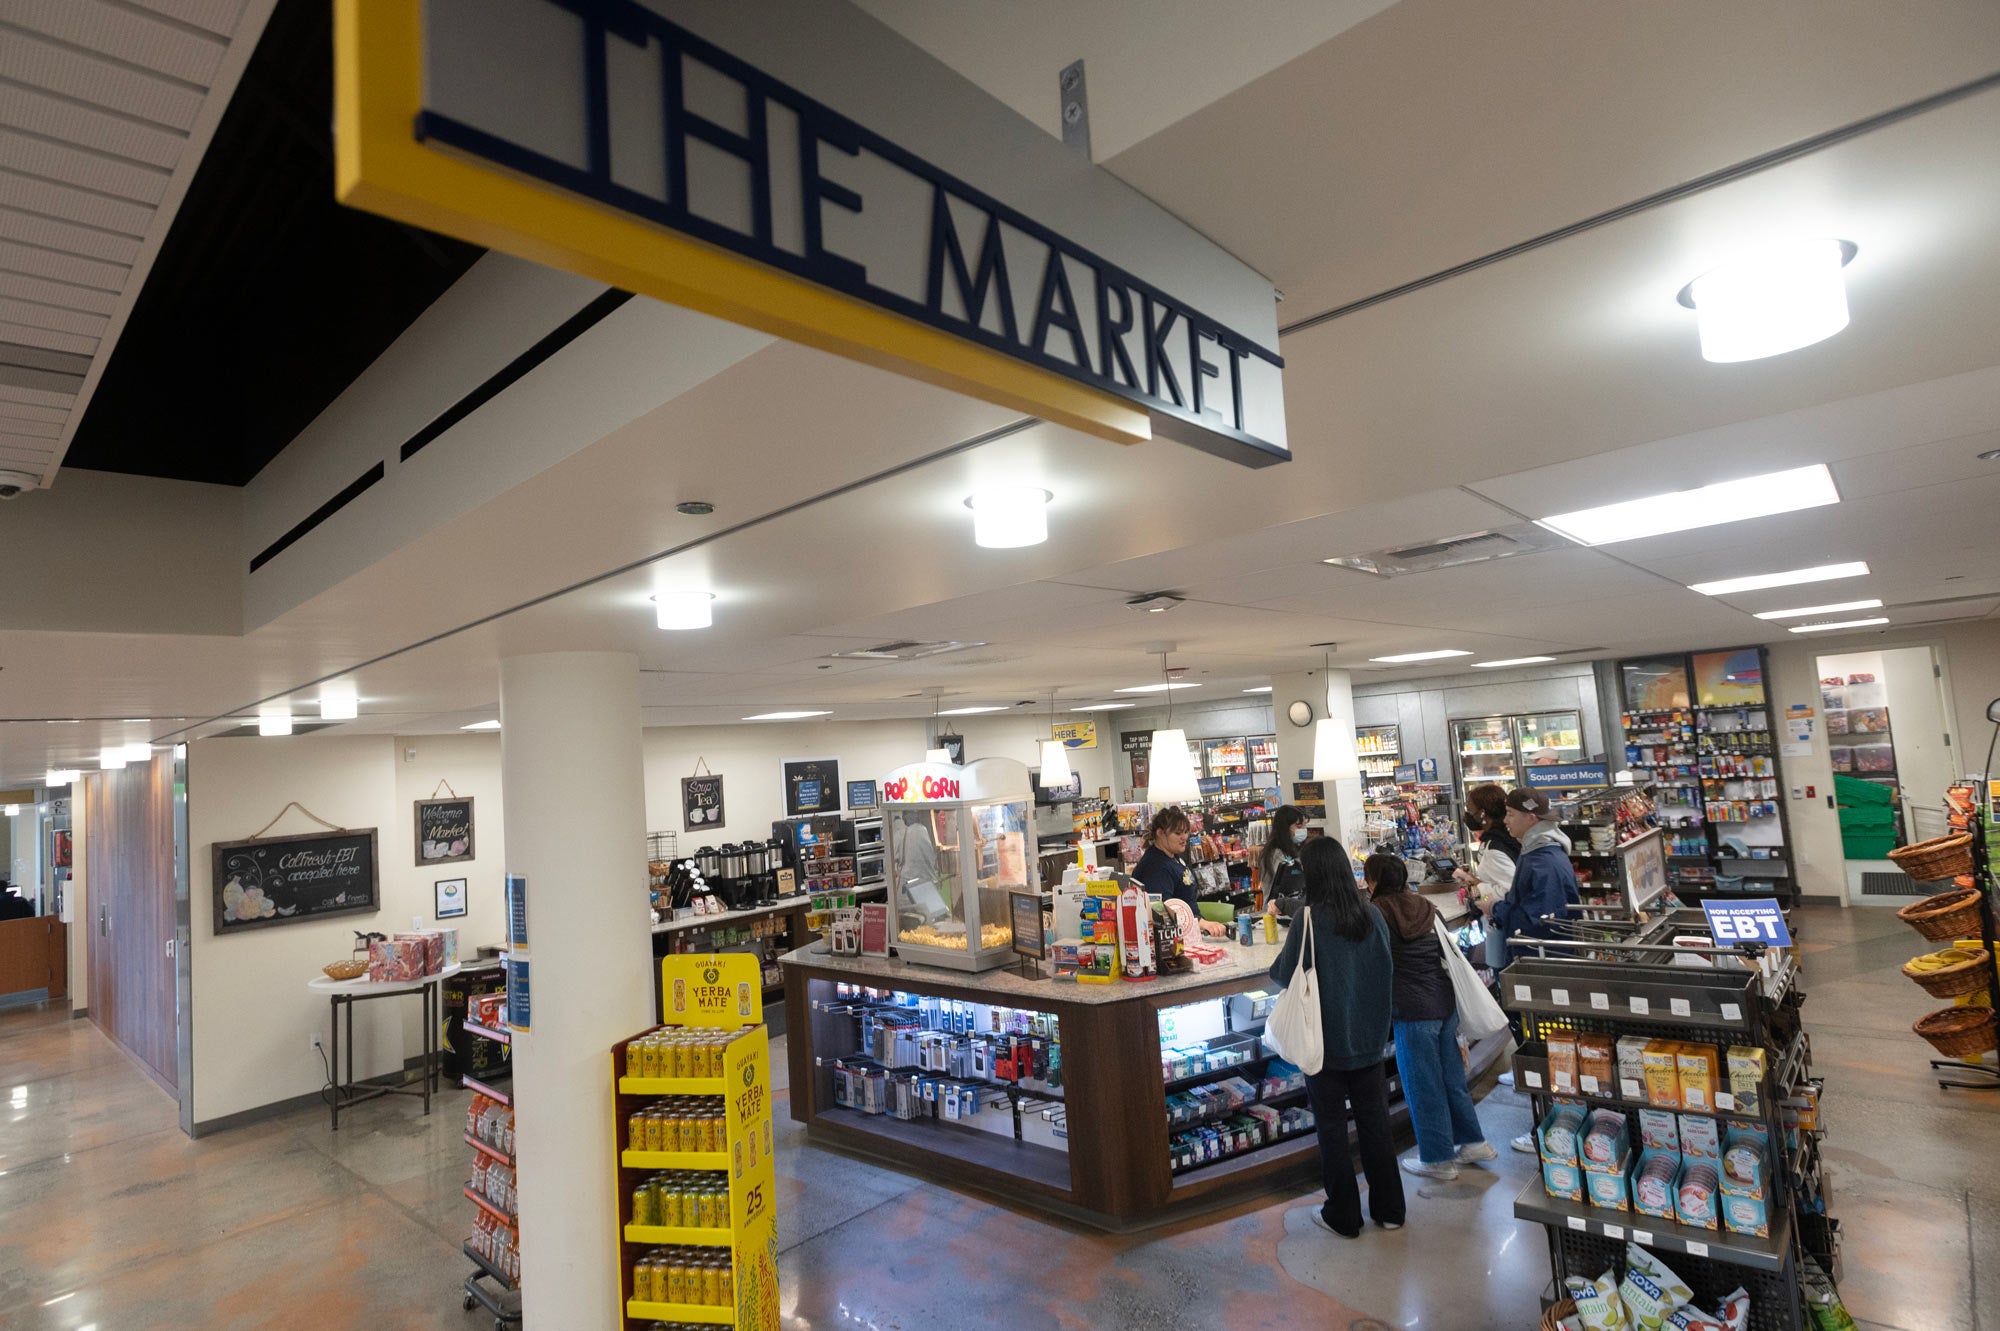 "The Market" sign hangs over entrance to Memorial Union market